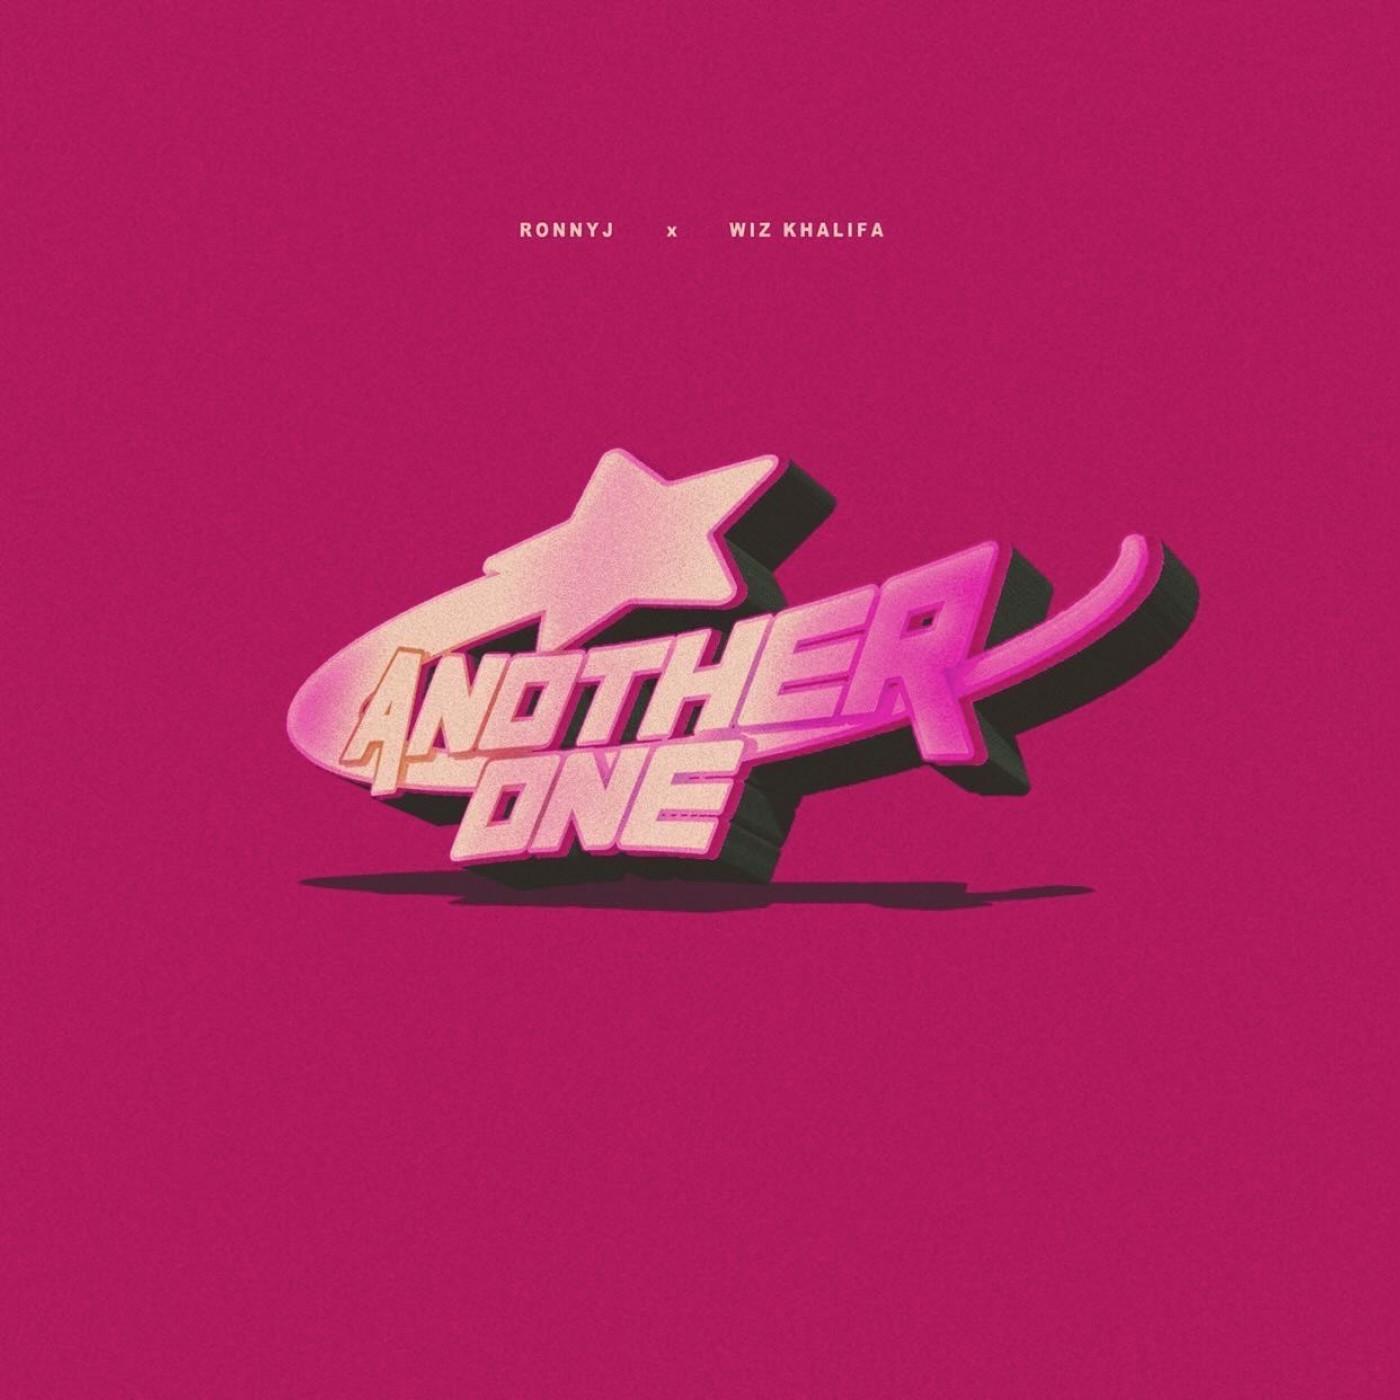 Ronny J - ANOTHER ONE